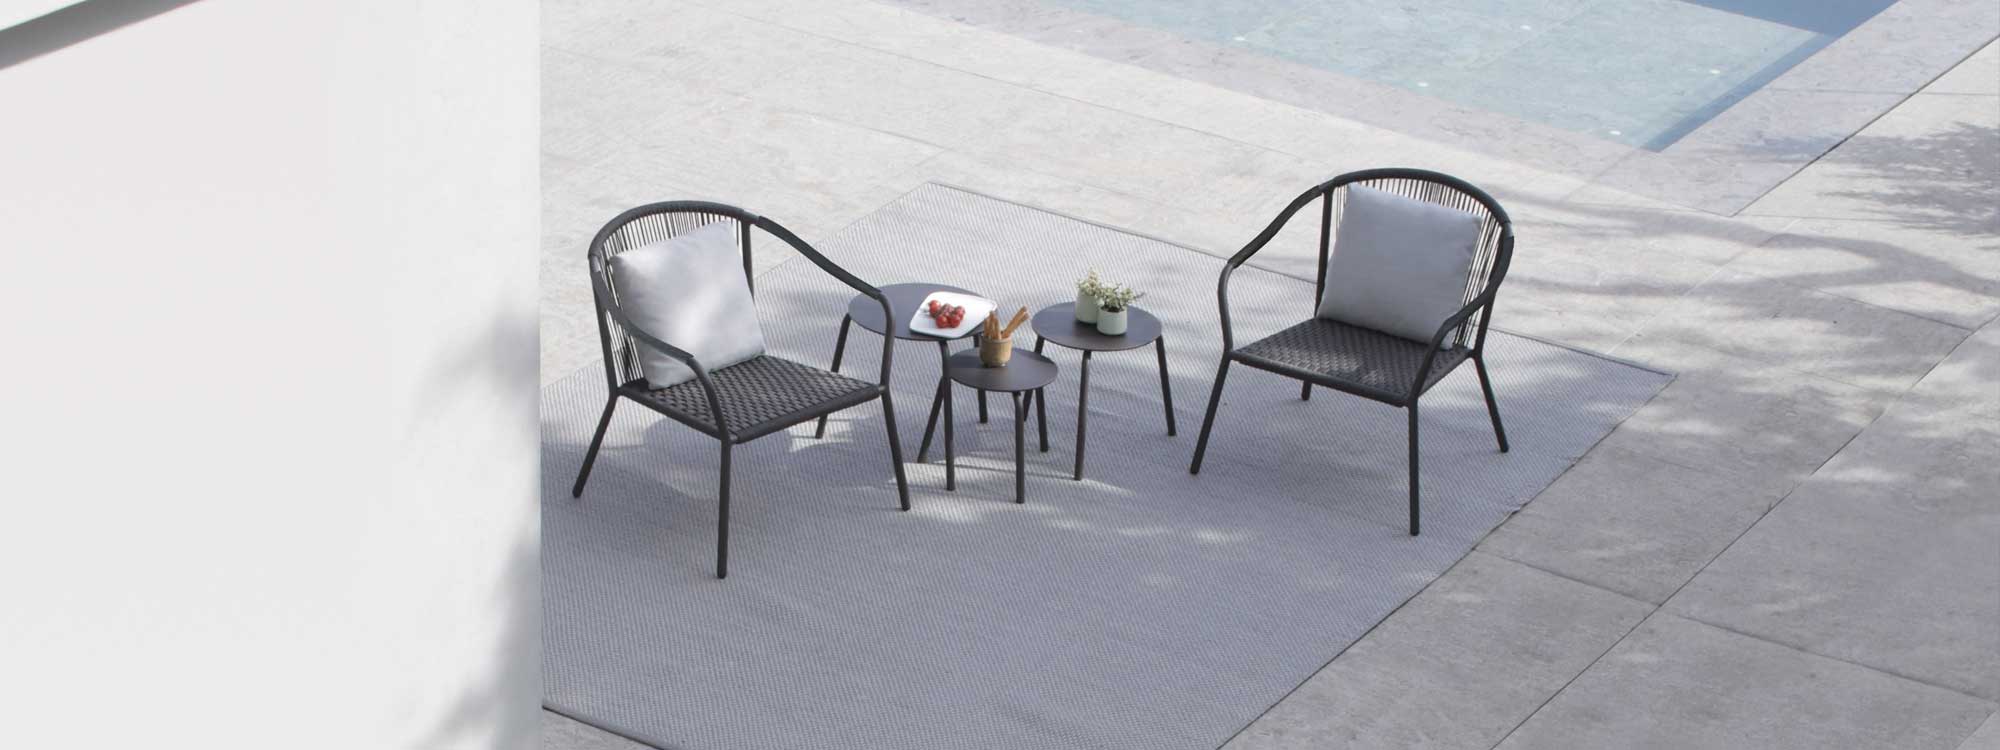 Image of Samba relax chairs and low tables by Royal Botania